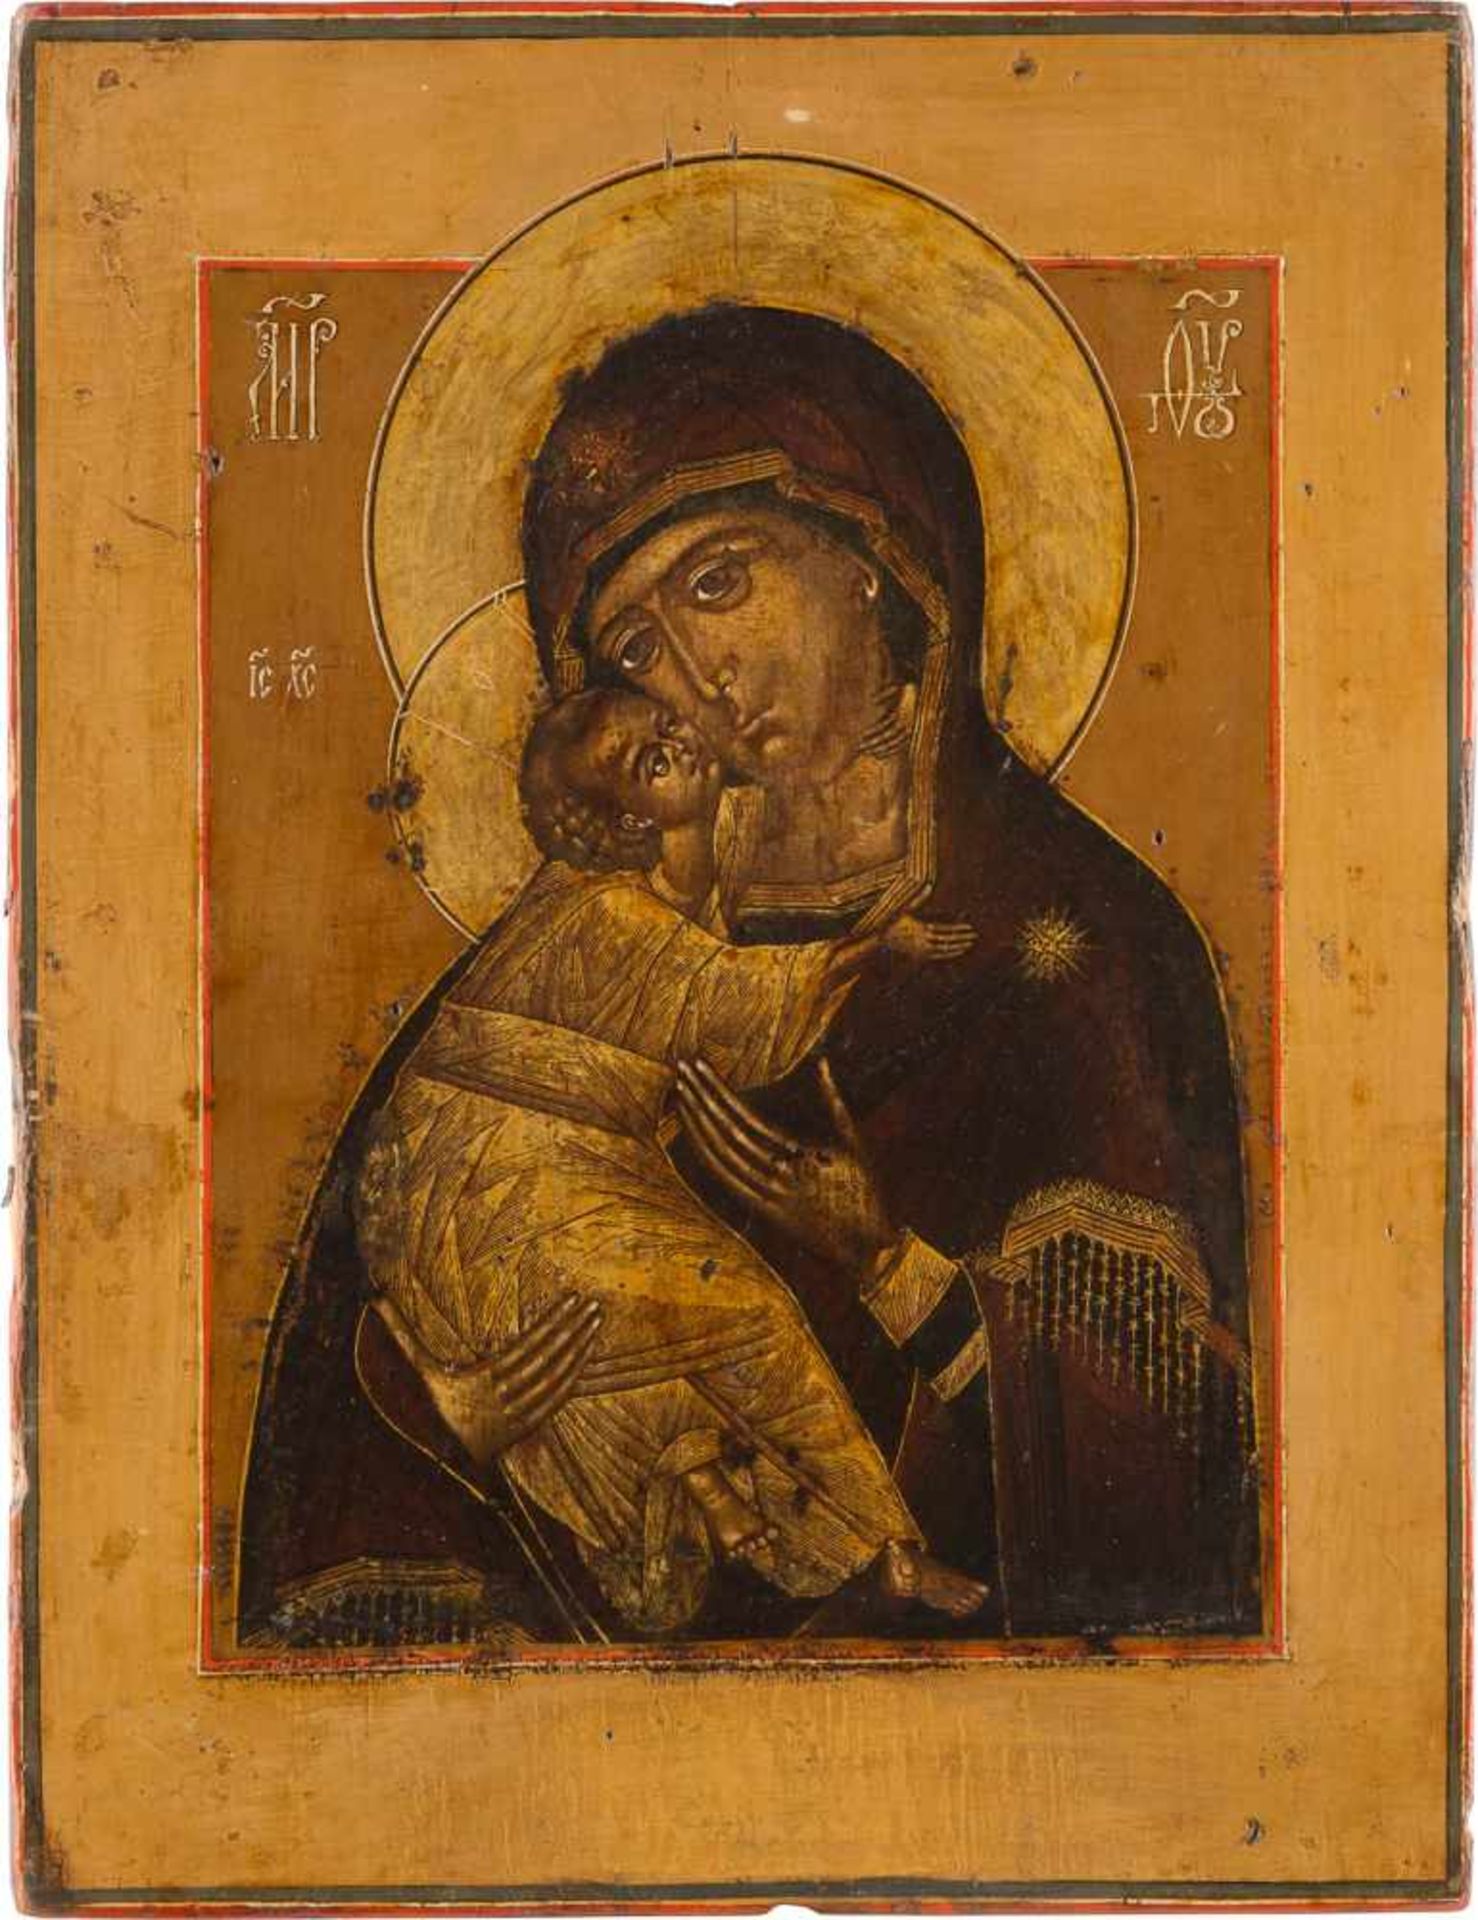 A FINE ICON SHOWING THE VLADIMIRSKAYA MOTHER OF GOD